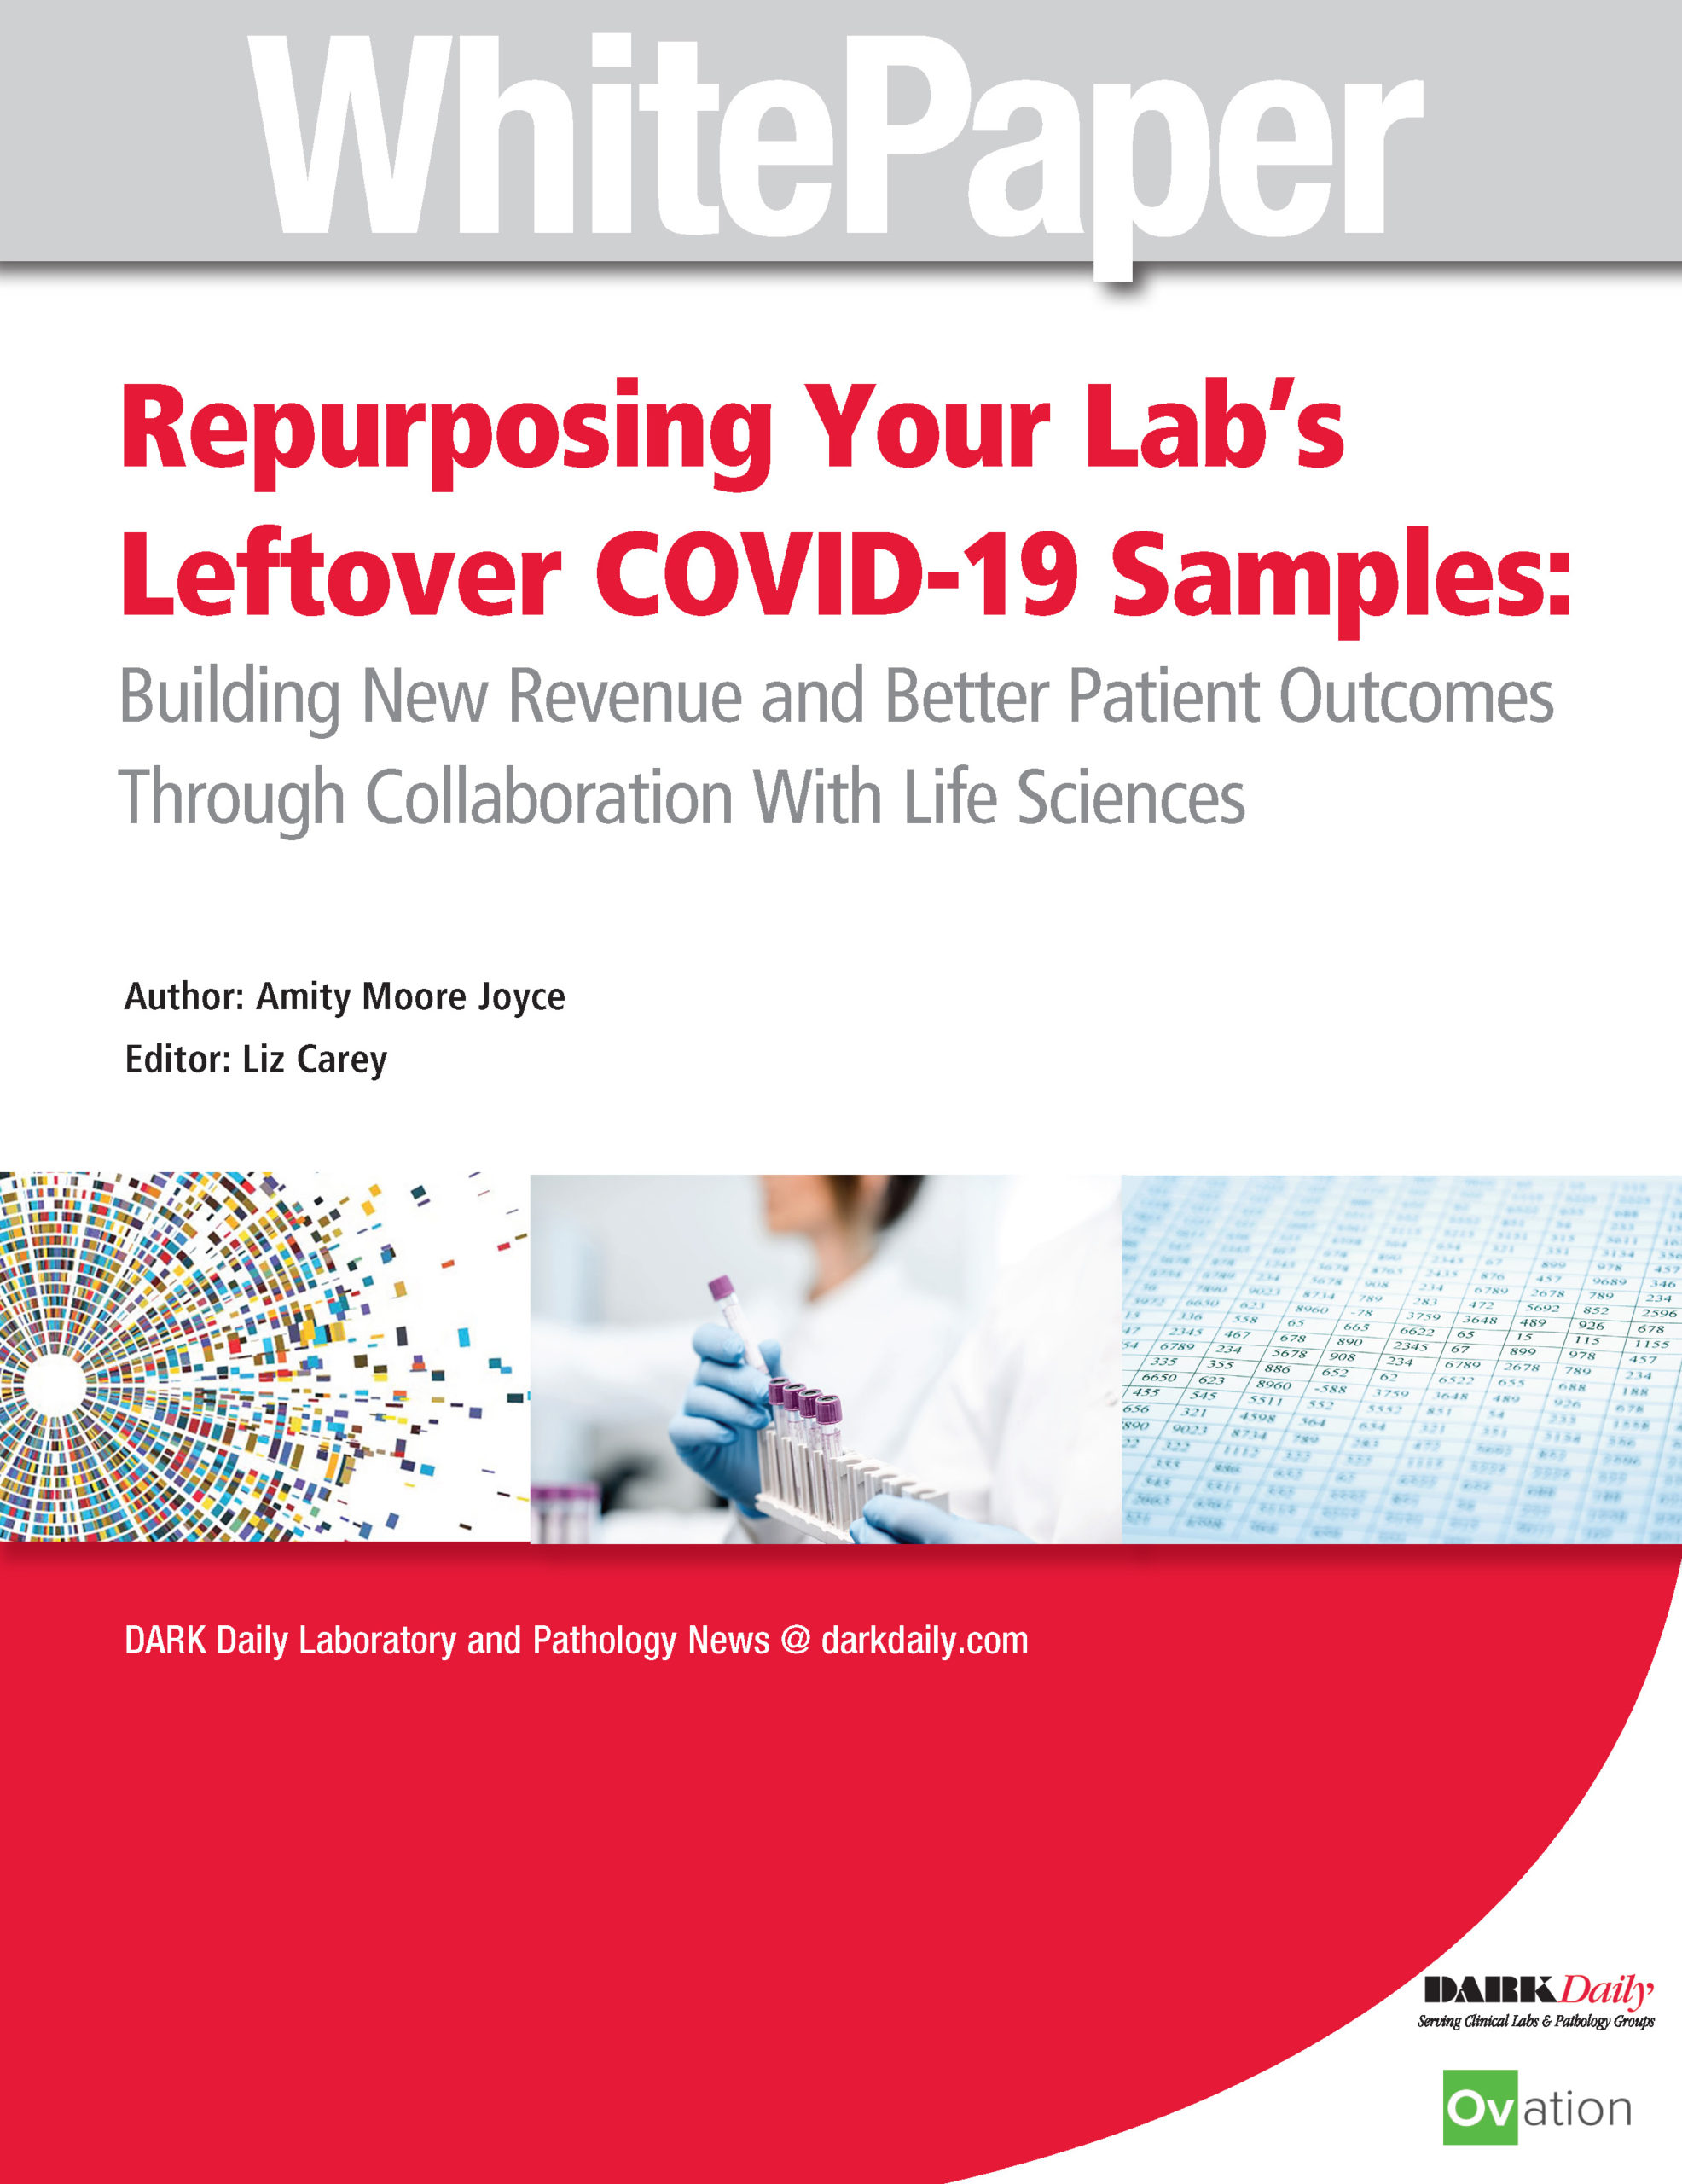 Free White Paper - Repurposing your lab's leftover COVID-19 samples